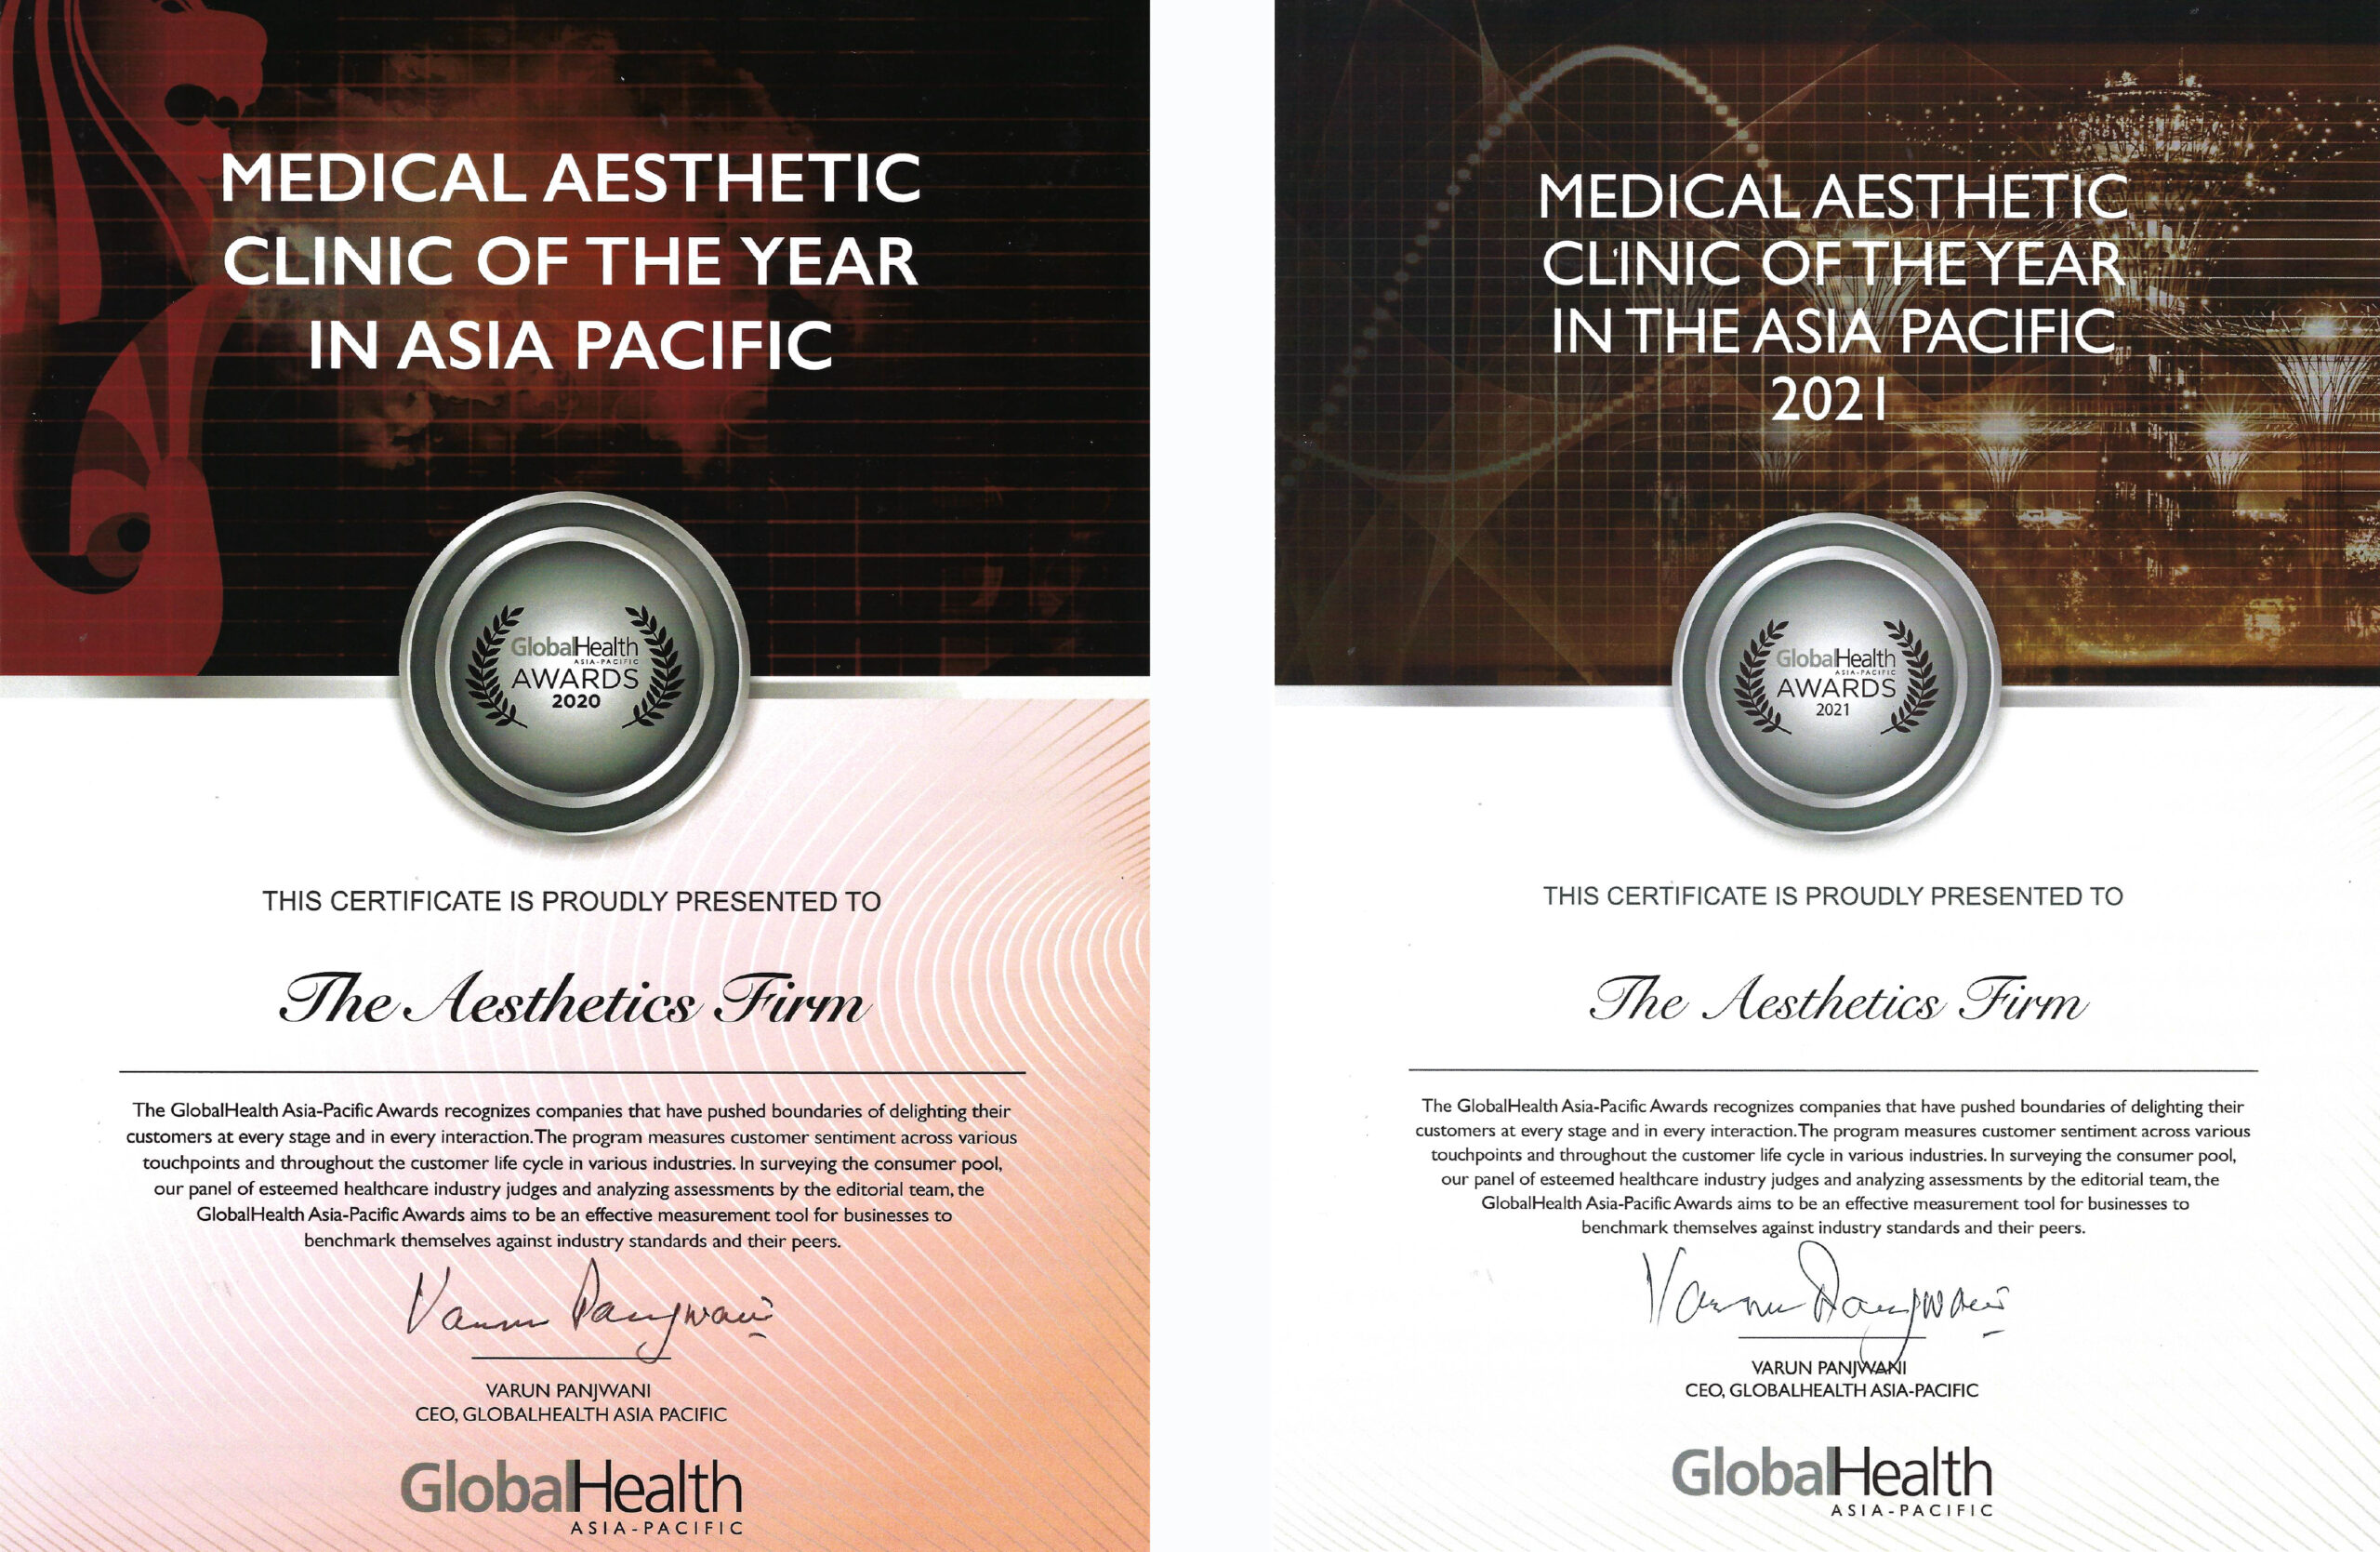 Medical Aesthetic Clinic of the Year